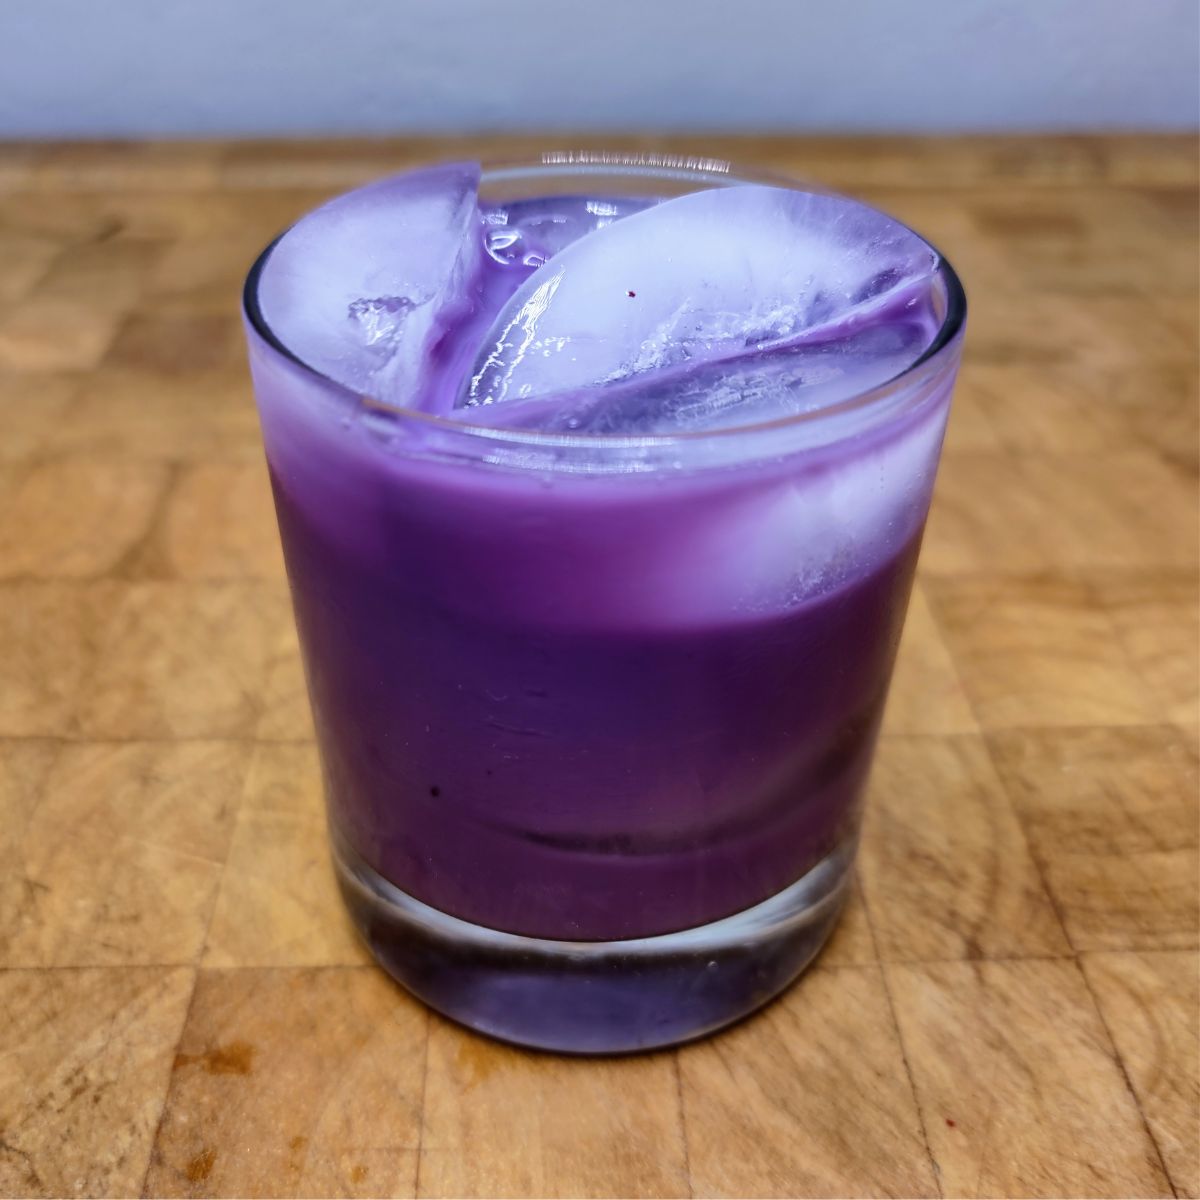 Blueberry milk in a rocks glass on a wooden table.